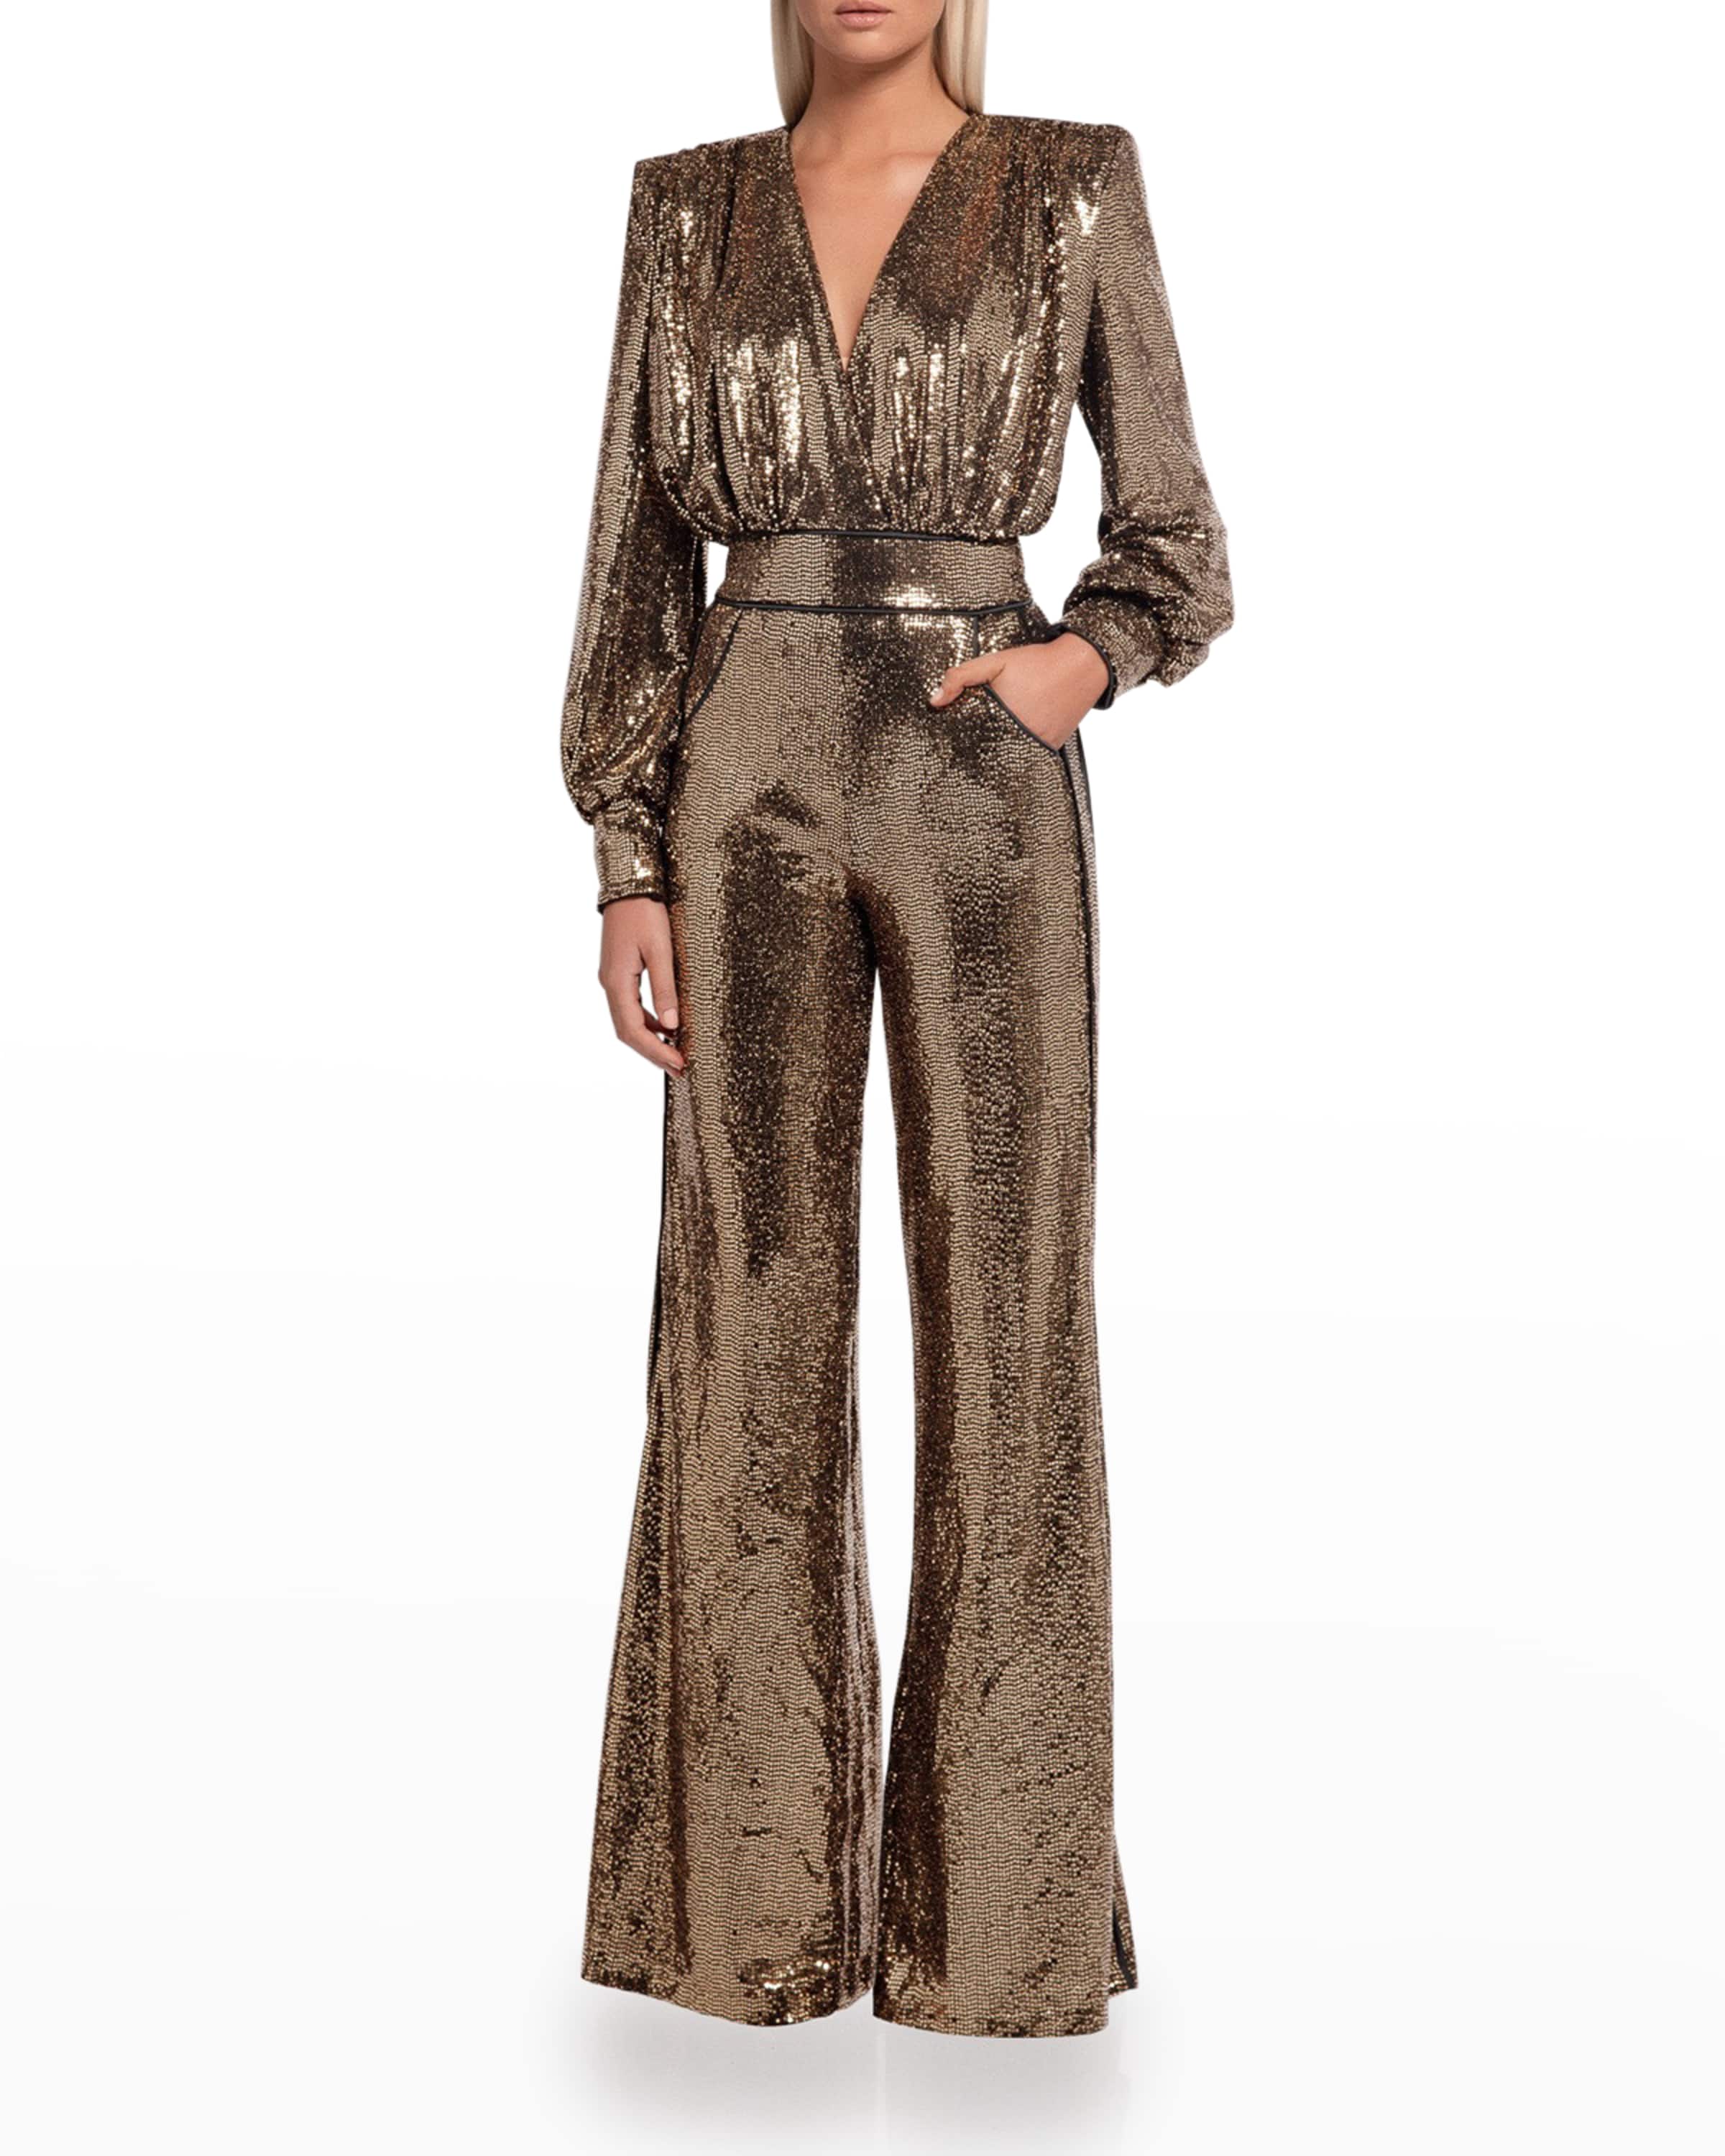 Sparkly Gold Jumpsuit for Wedding Guest with Long Sleeves